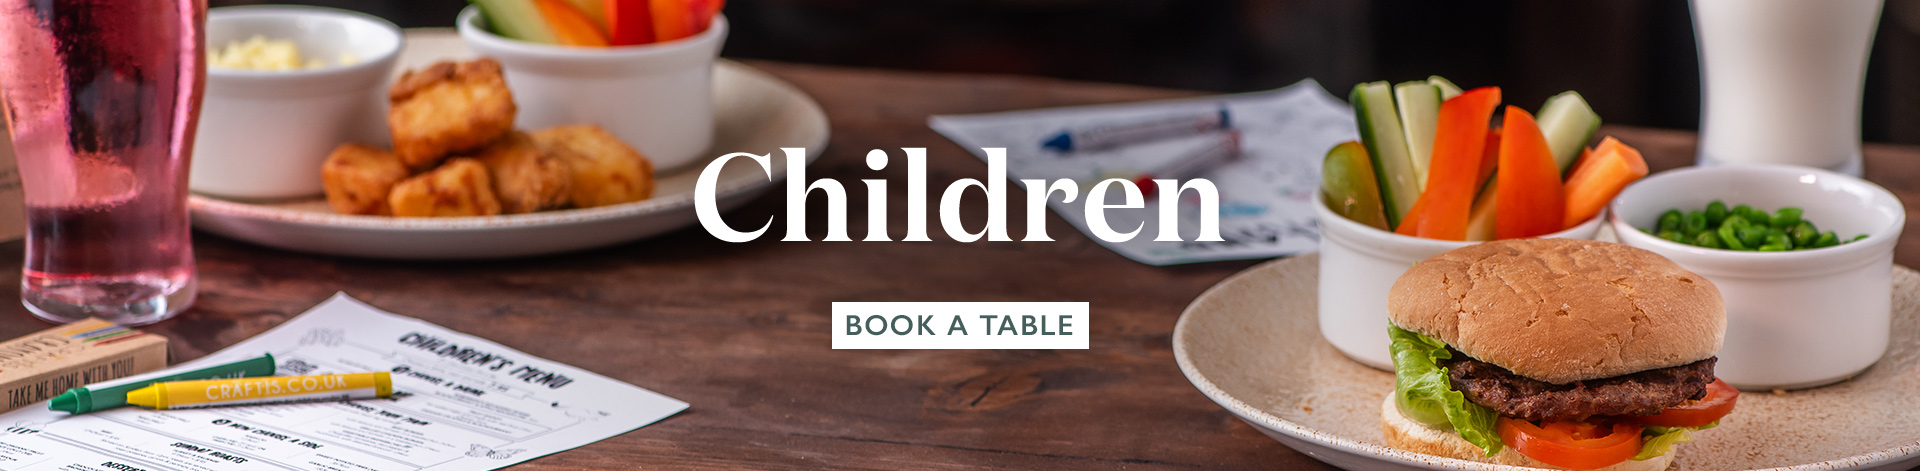 Children's Menu at The Curlew